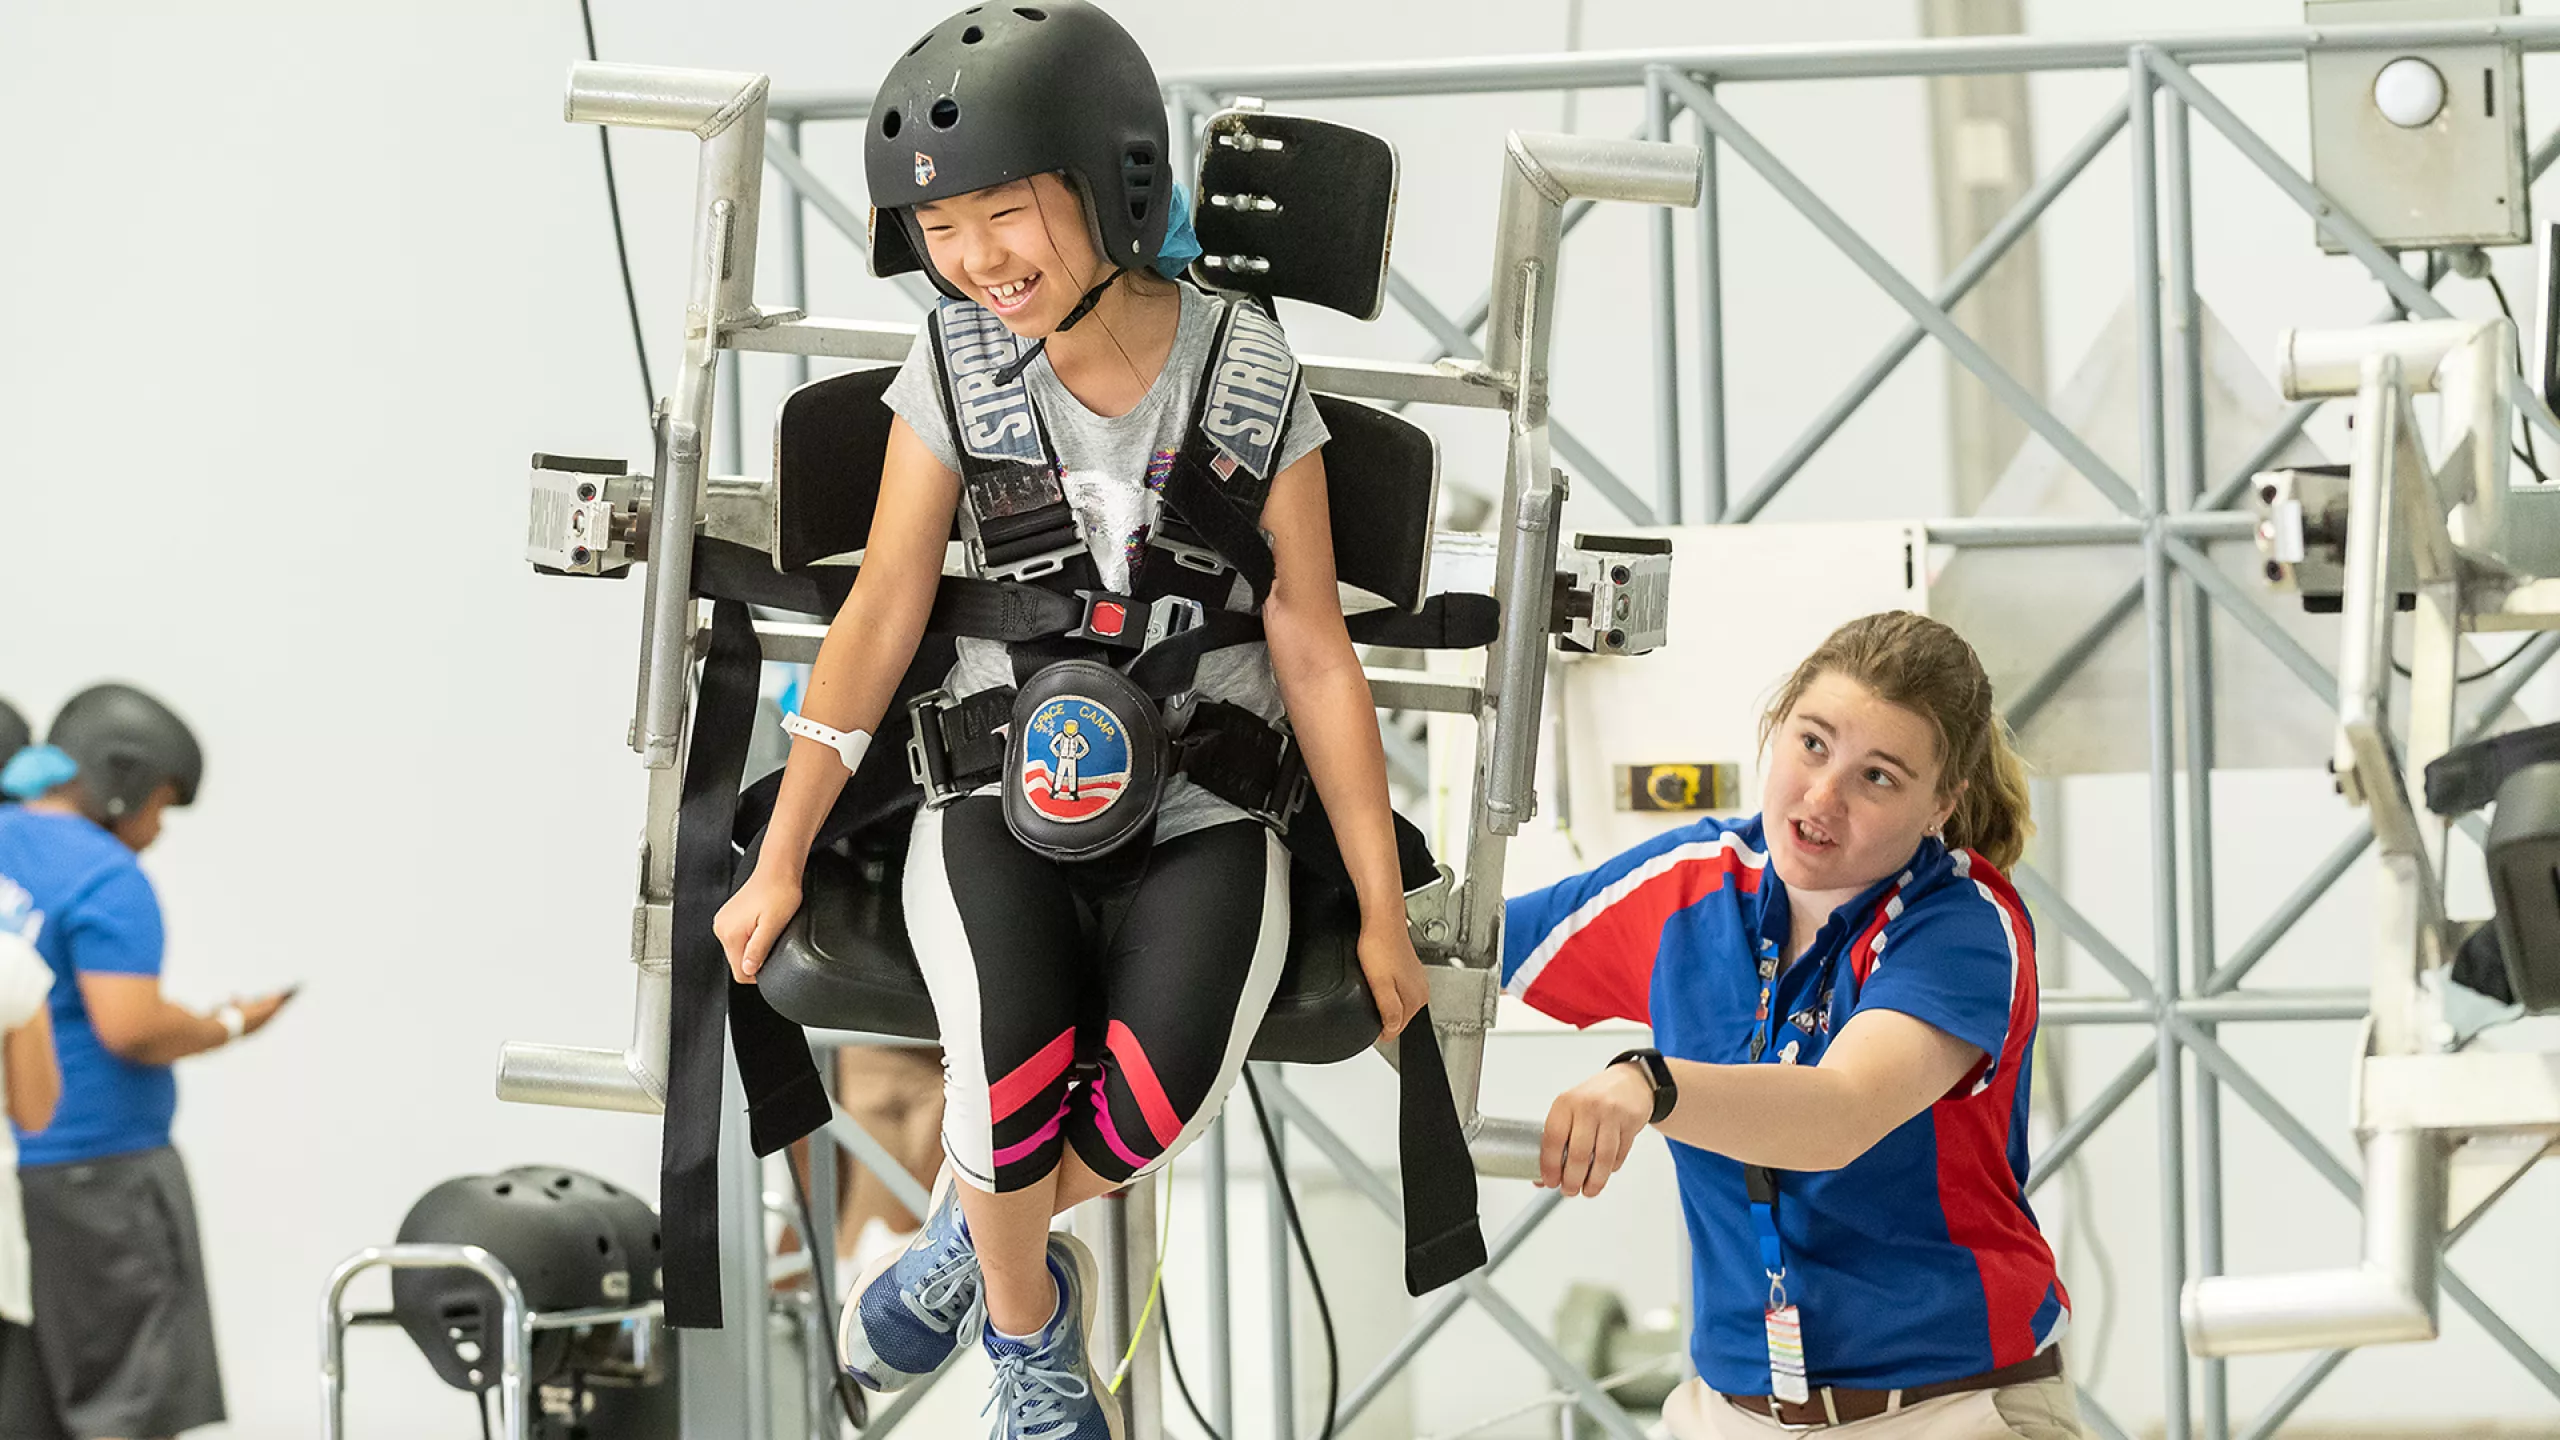 A space camp trainee experiences the five degrees of freedom in a chair that simulates movement in space.